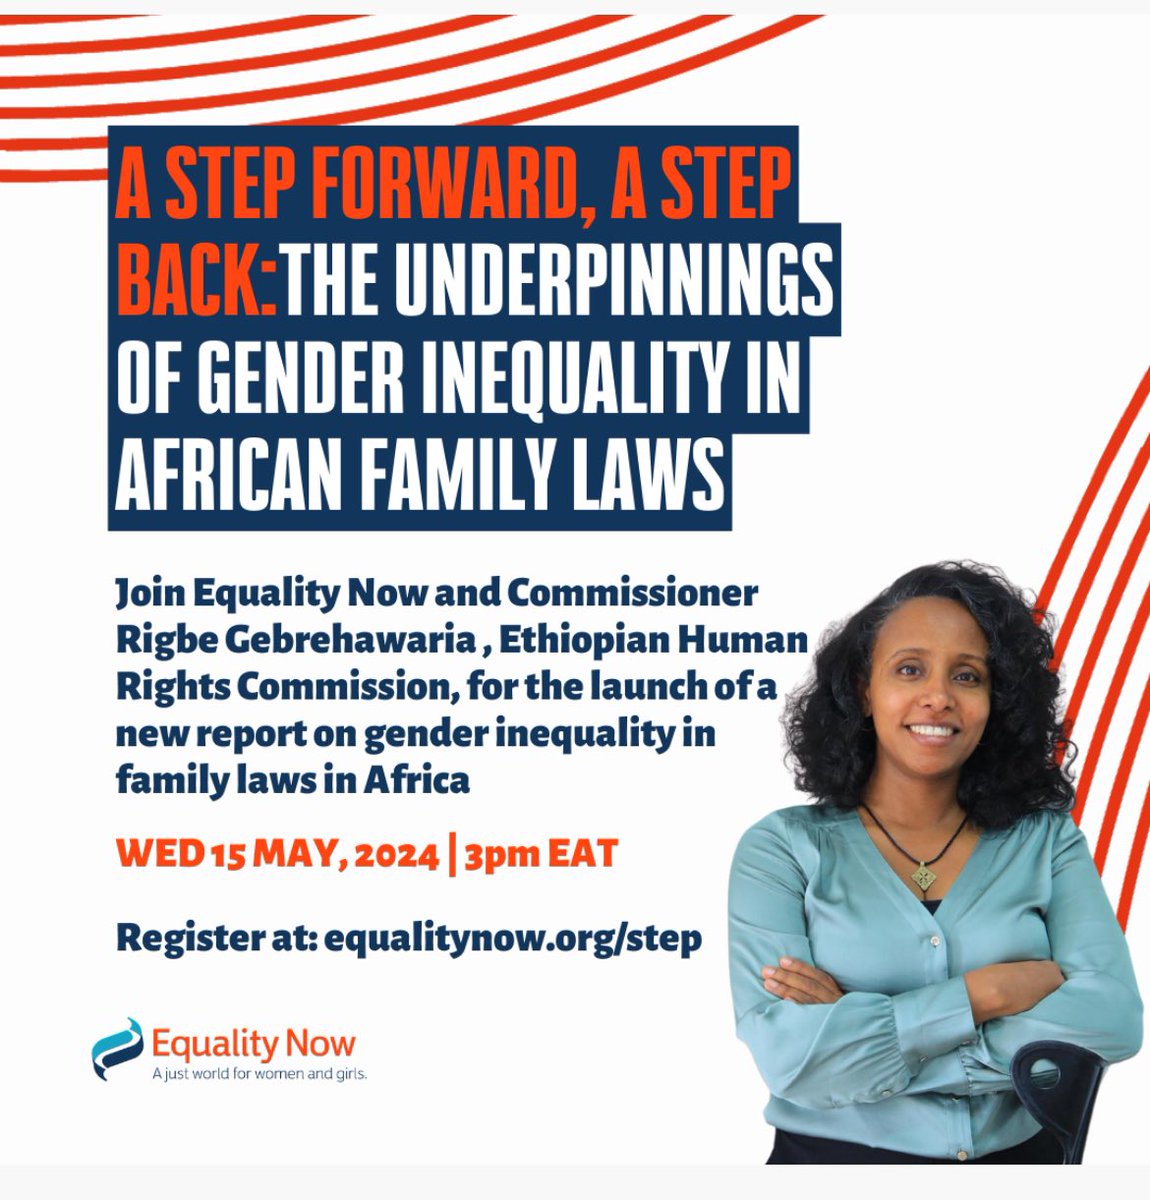 Pleased to join the @equalitynow webinar tomorrow. We'll be discussing the laws governing family structures and relationships that play a crucial role in shaping the lives of #women and #girls in #Africa. Sign up now! lnkd.in/eYys9kmG